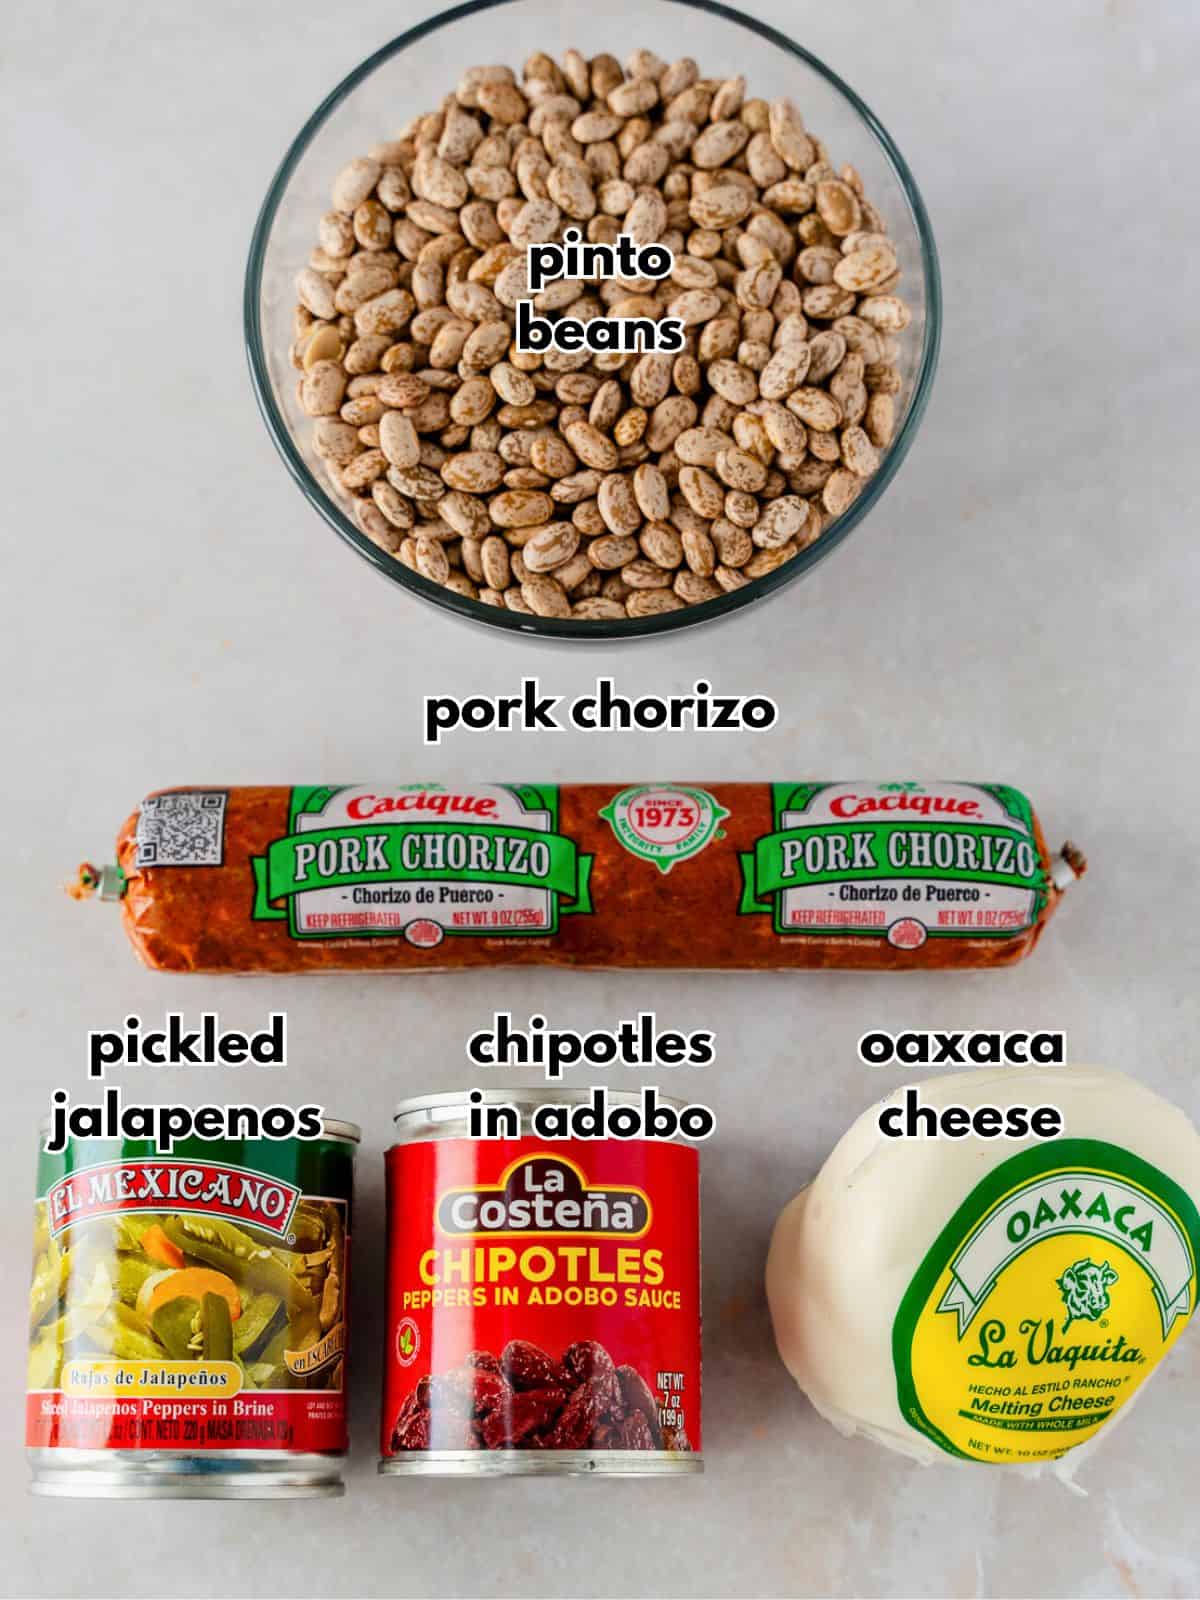 Ingredients with text, pinto beans, pork chorizo, pickled jalapenos, chipotles in adobo, Oaxaca cheese.